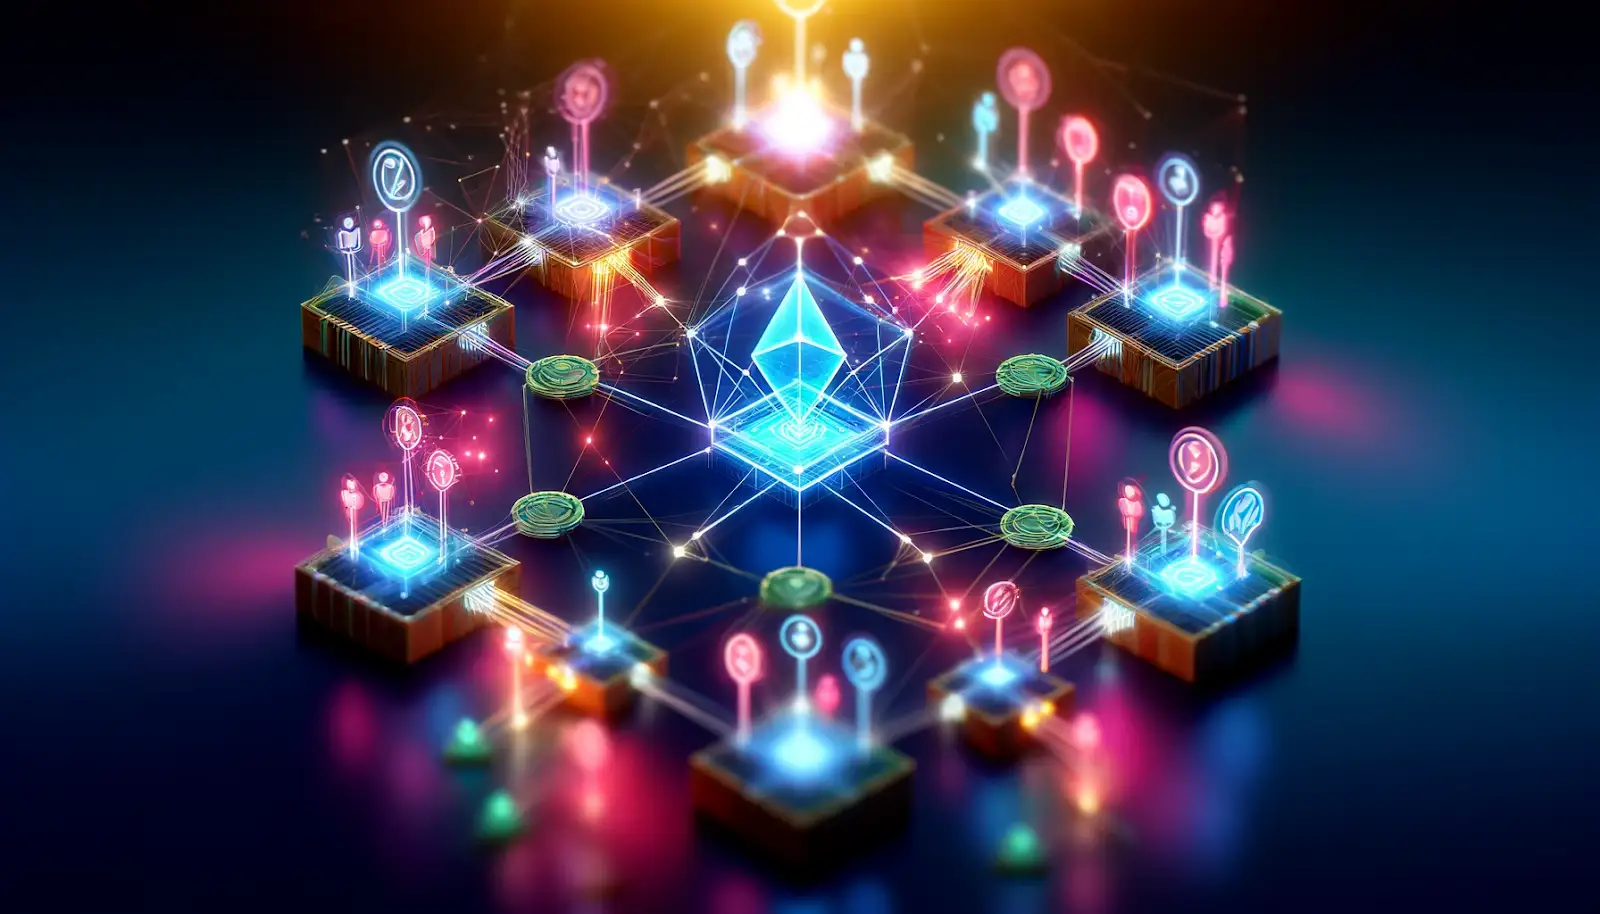 Decentralized blockchain network illuminated with colorful nodes and connections.